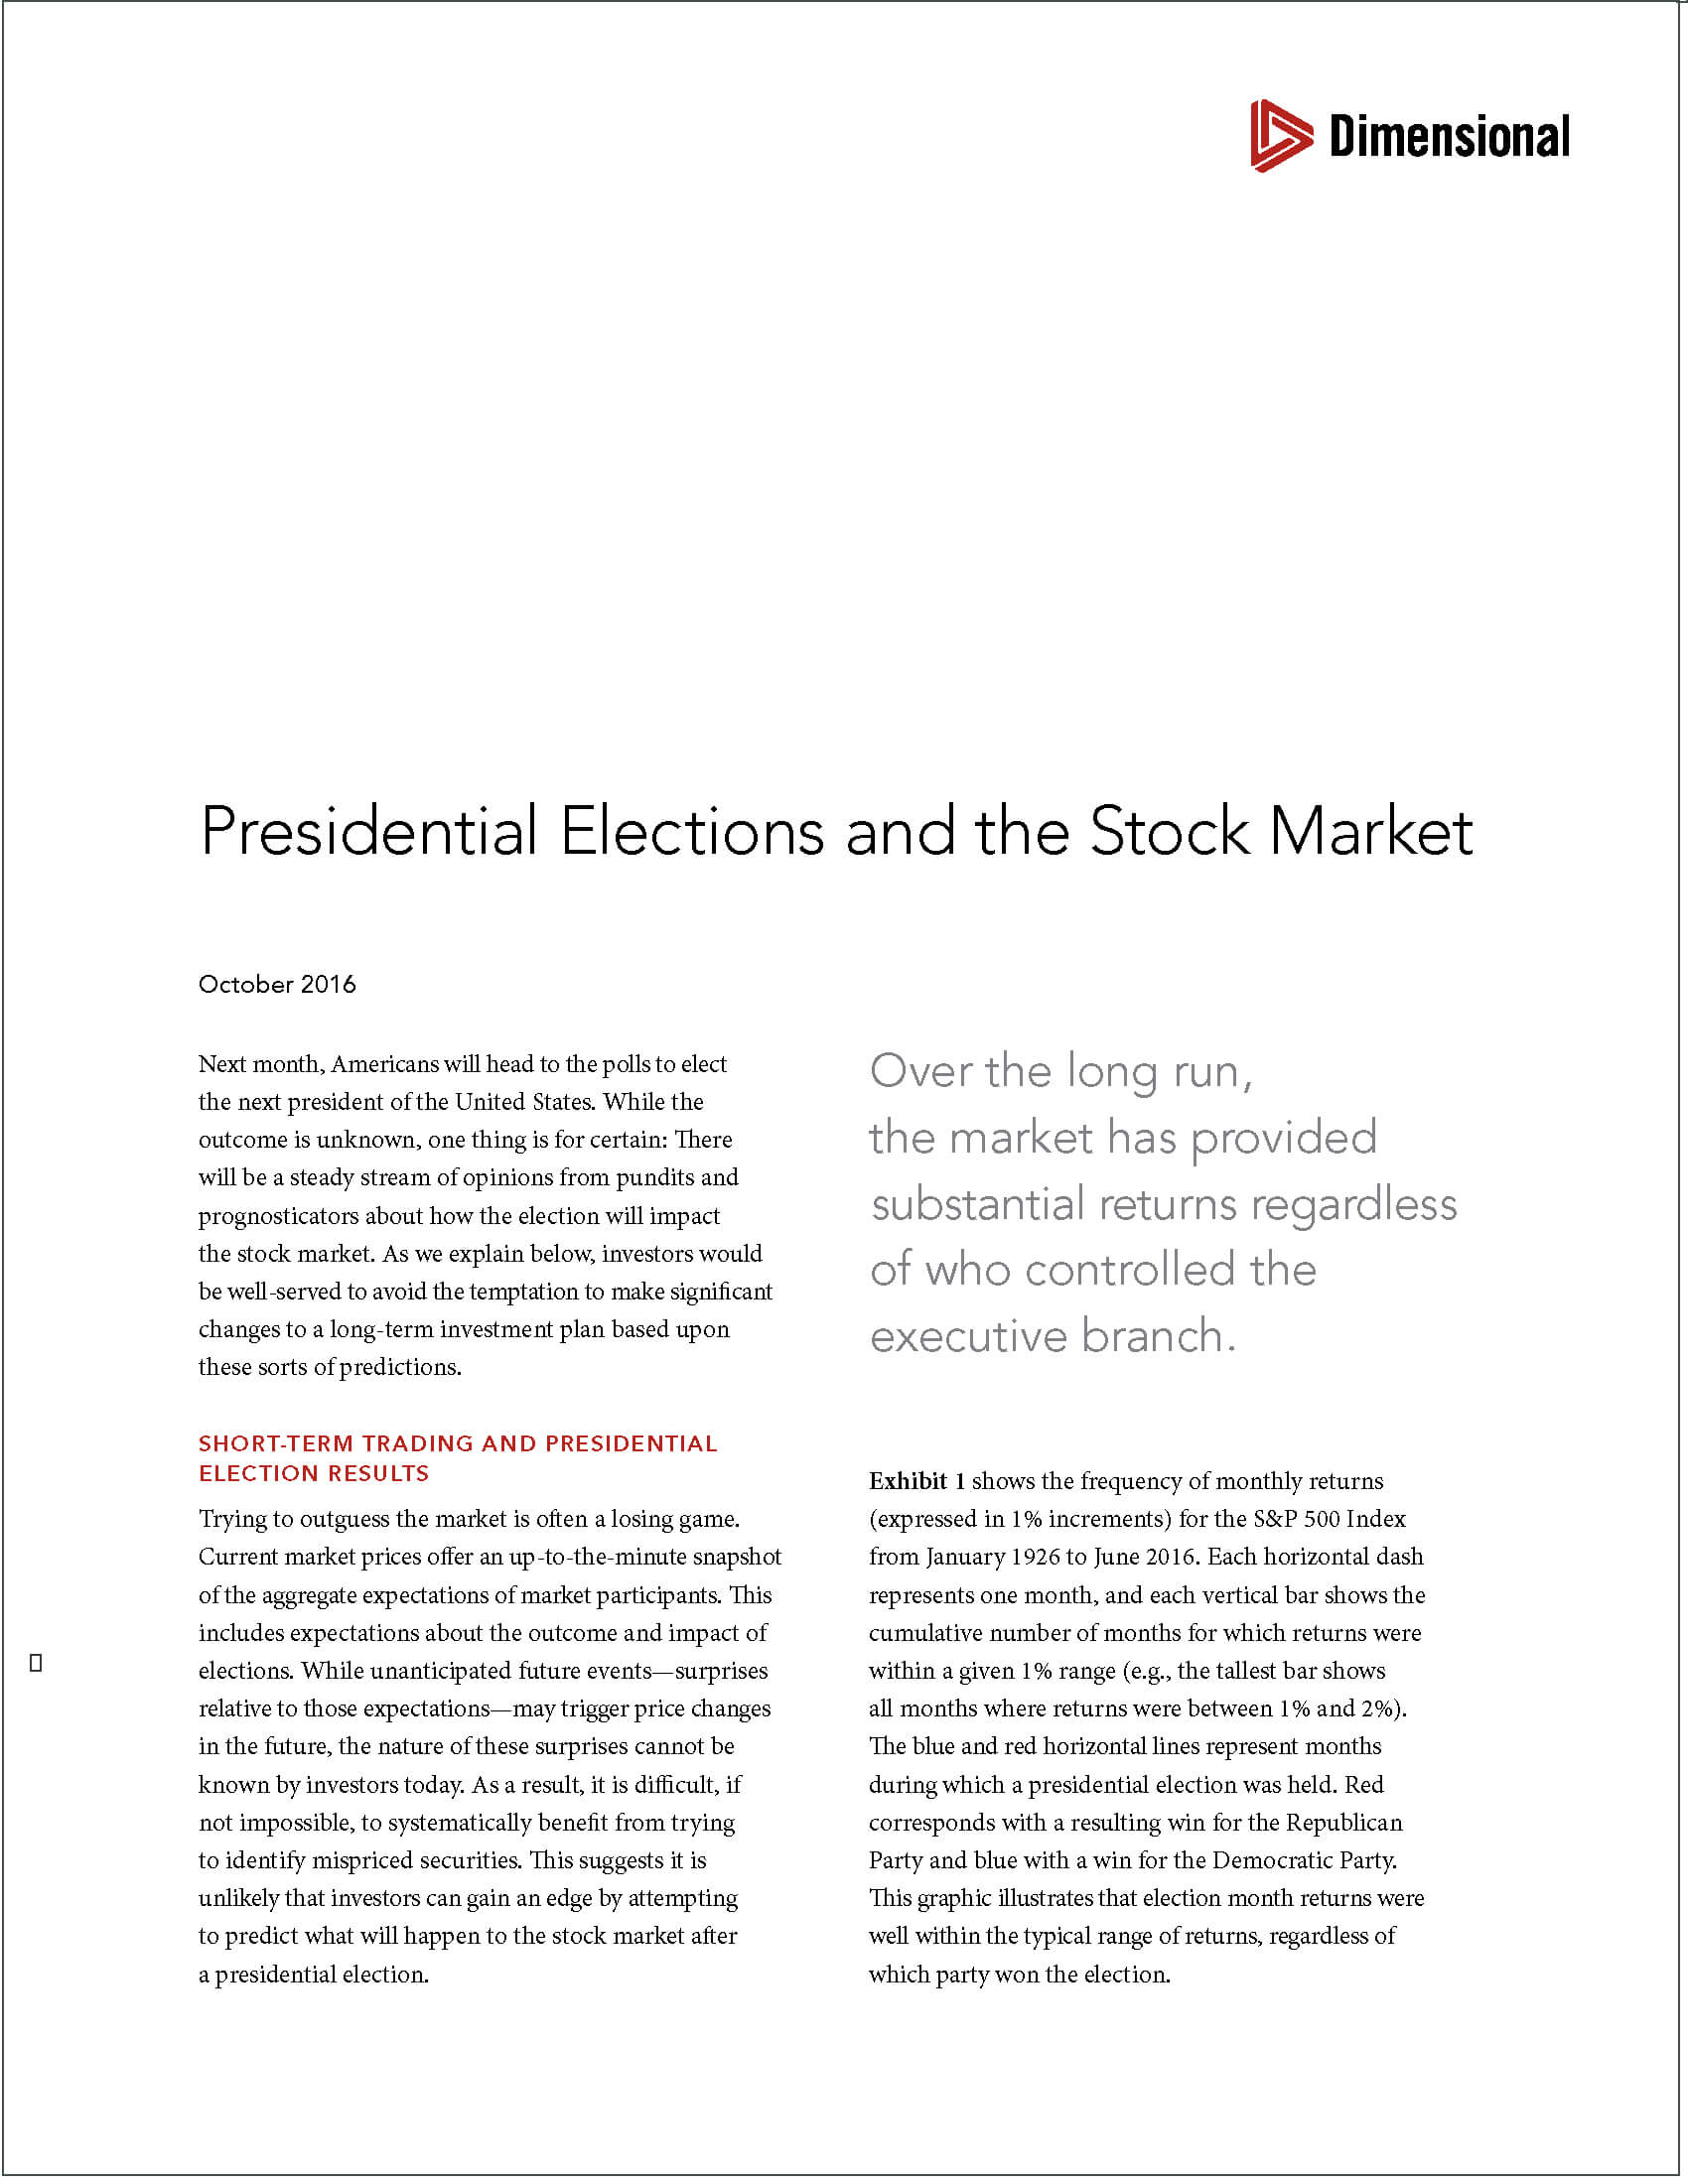 201610-presidential-elections-and-the-stock-market